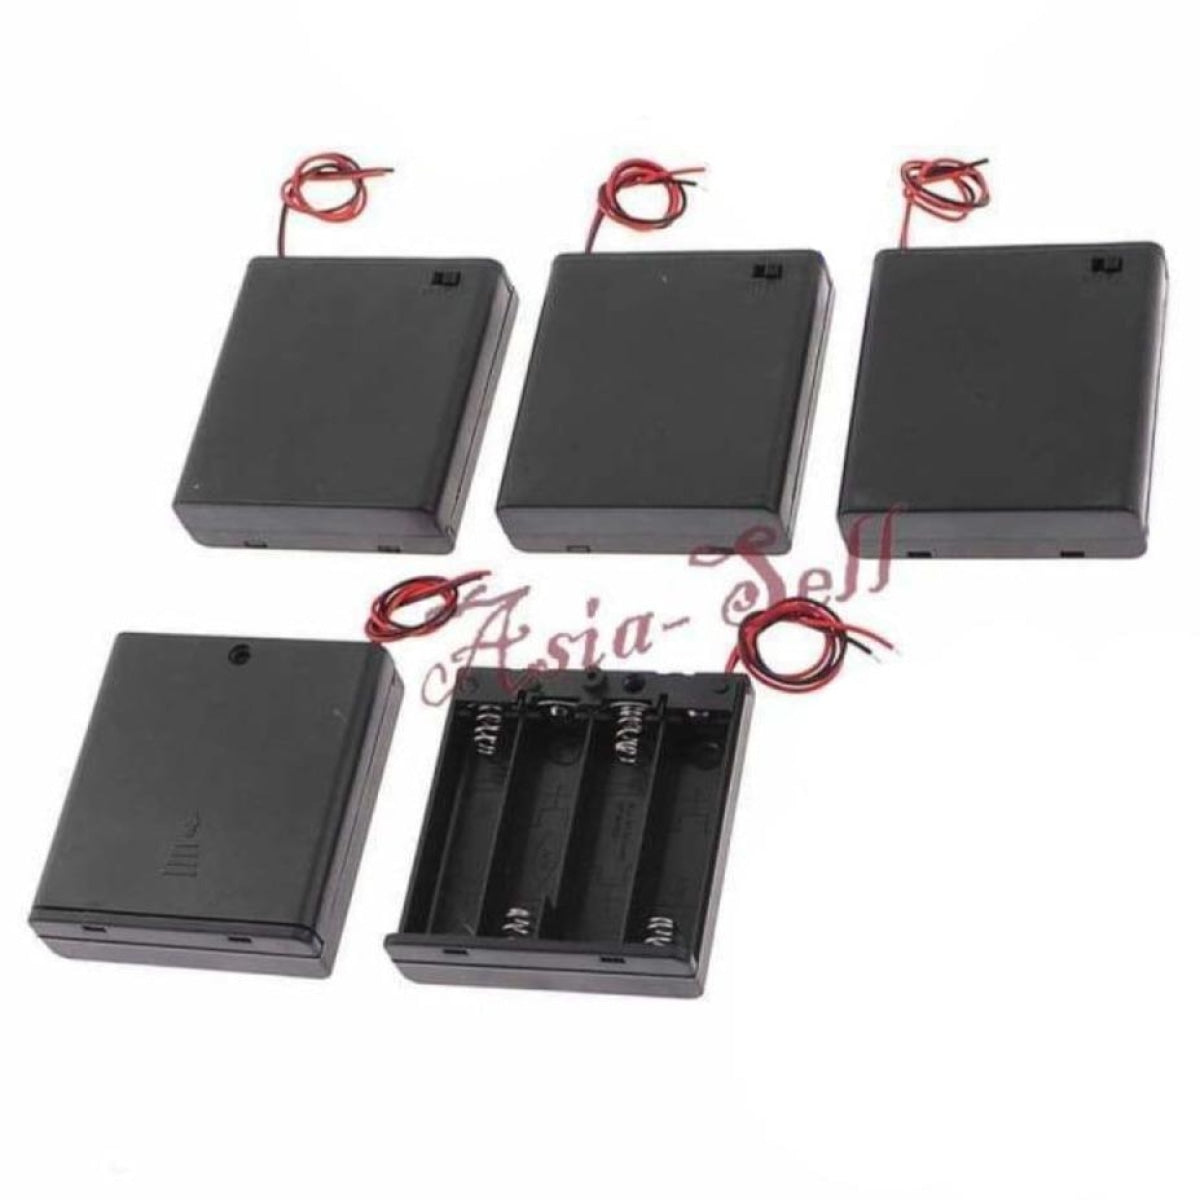 5Pcs 4X1.5V Aa Battery Holder 6V On/off Switch 2 Wire Lead Case Box 4Xaa 1.5V Holders